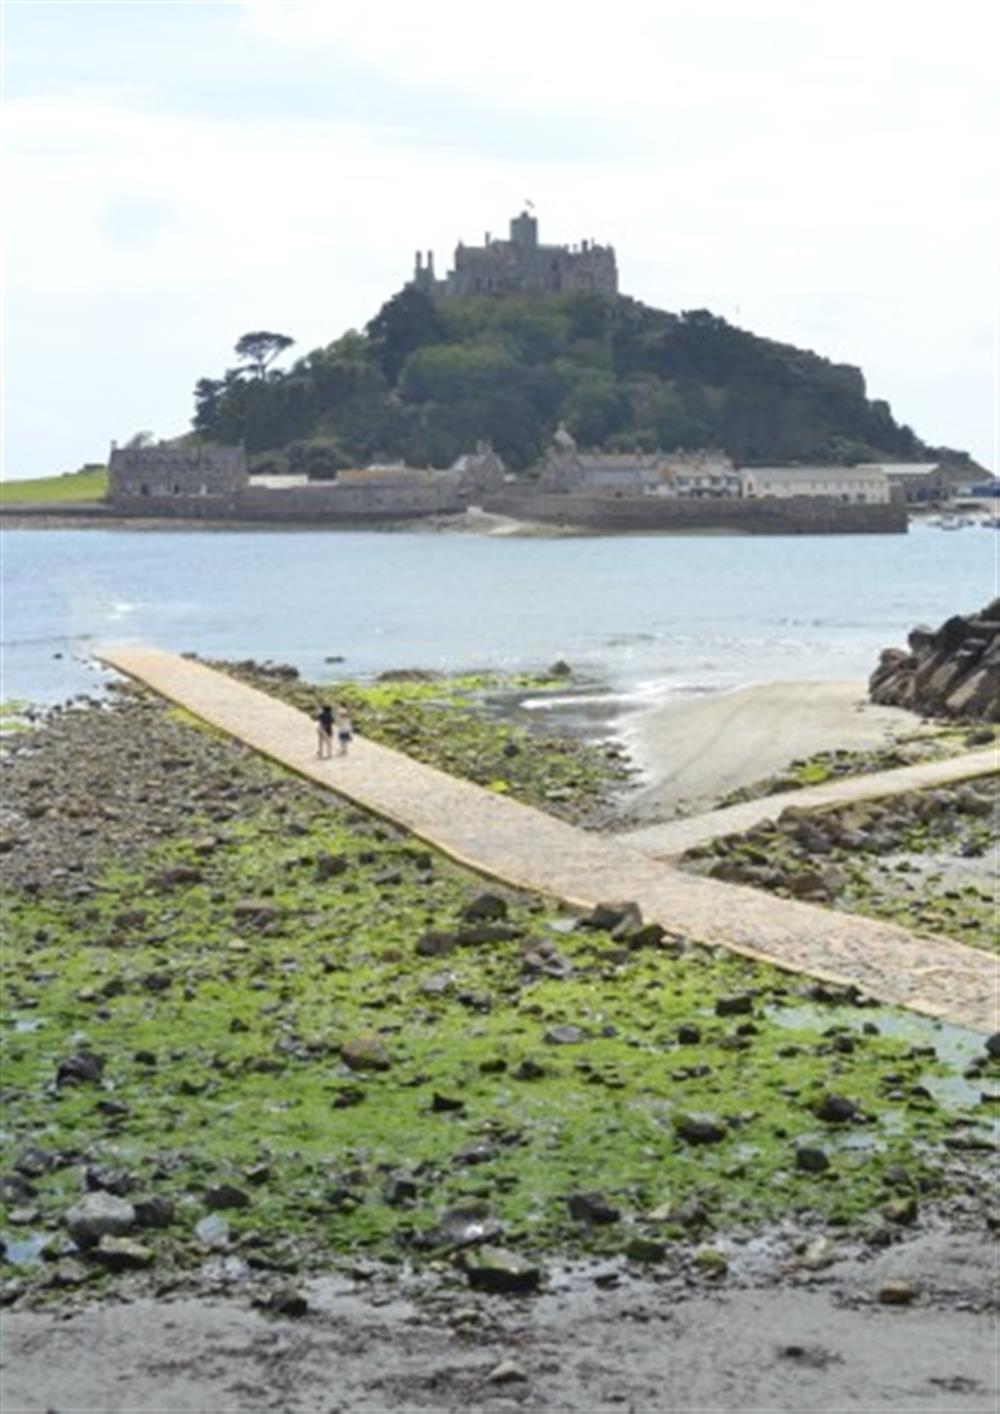 St Michael's Mount is a 45 minute drive. Walk across the causeway or catch the water-taxi to the island